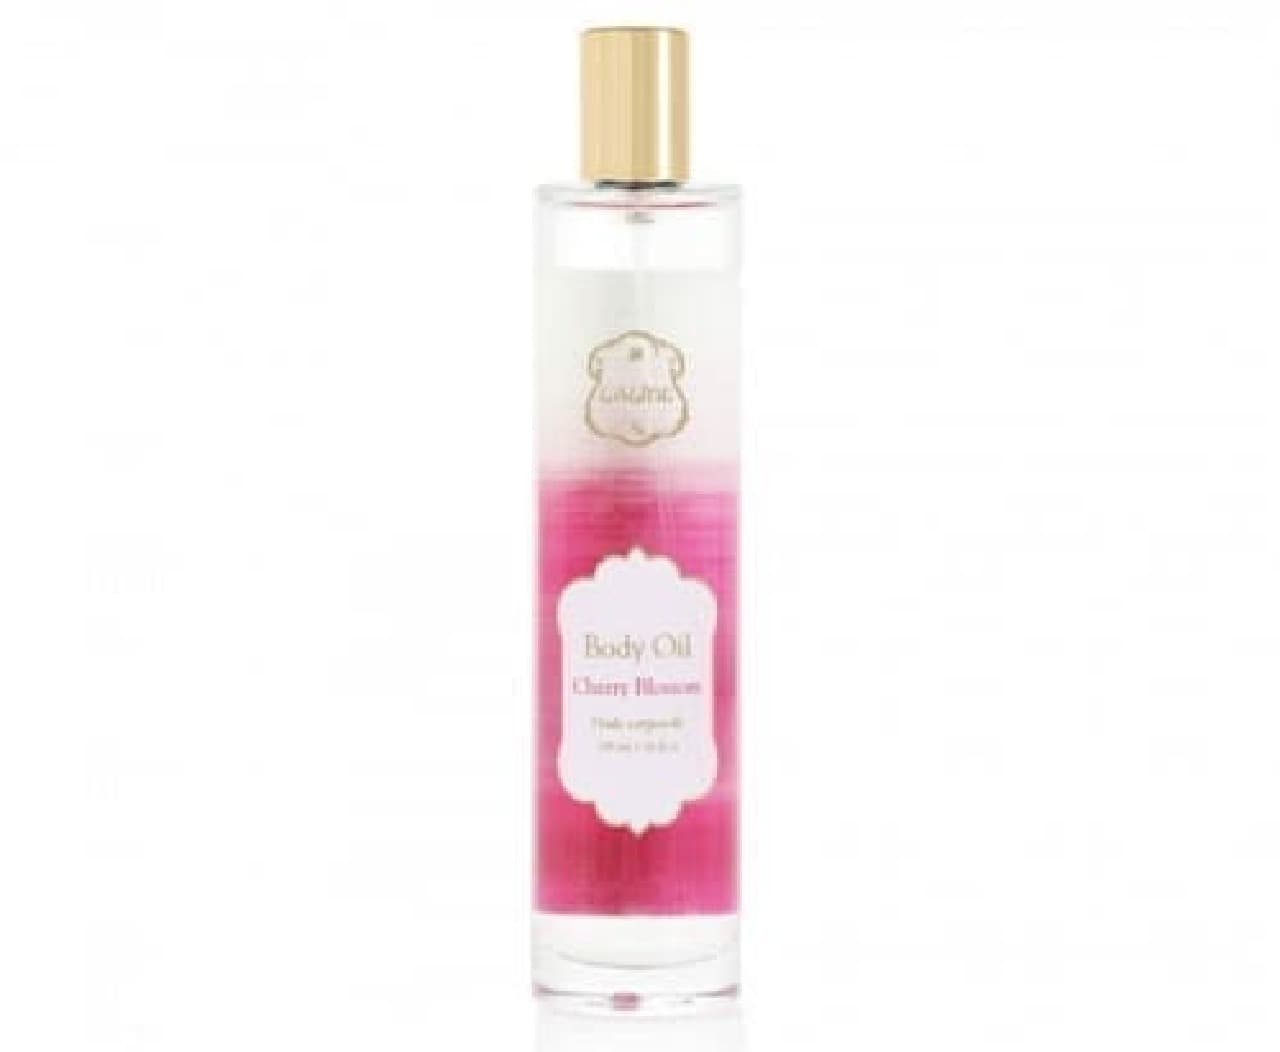 Laline Japan Limited Cherry Blossom Body Oil